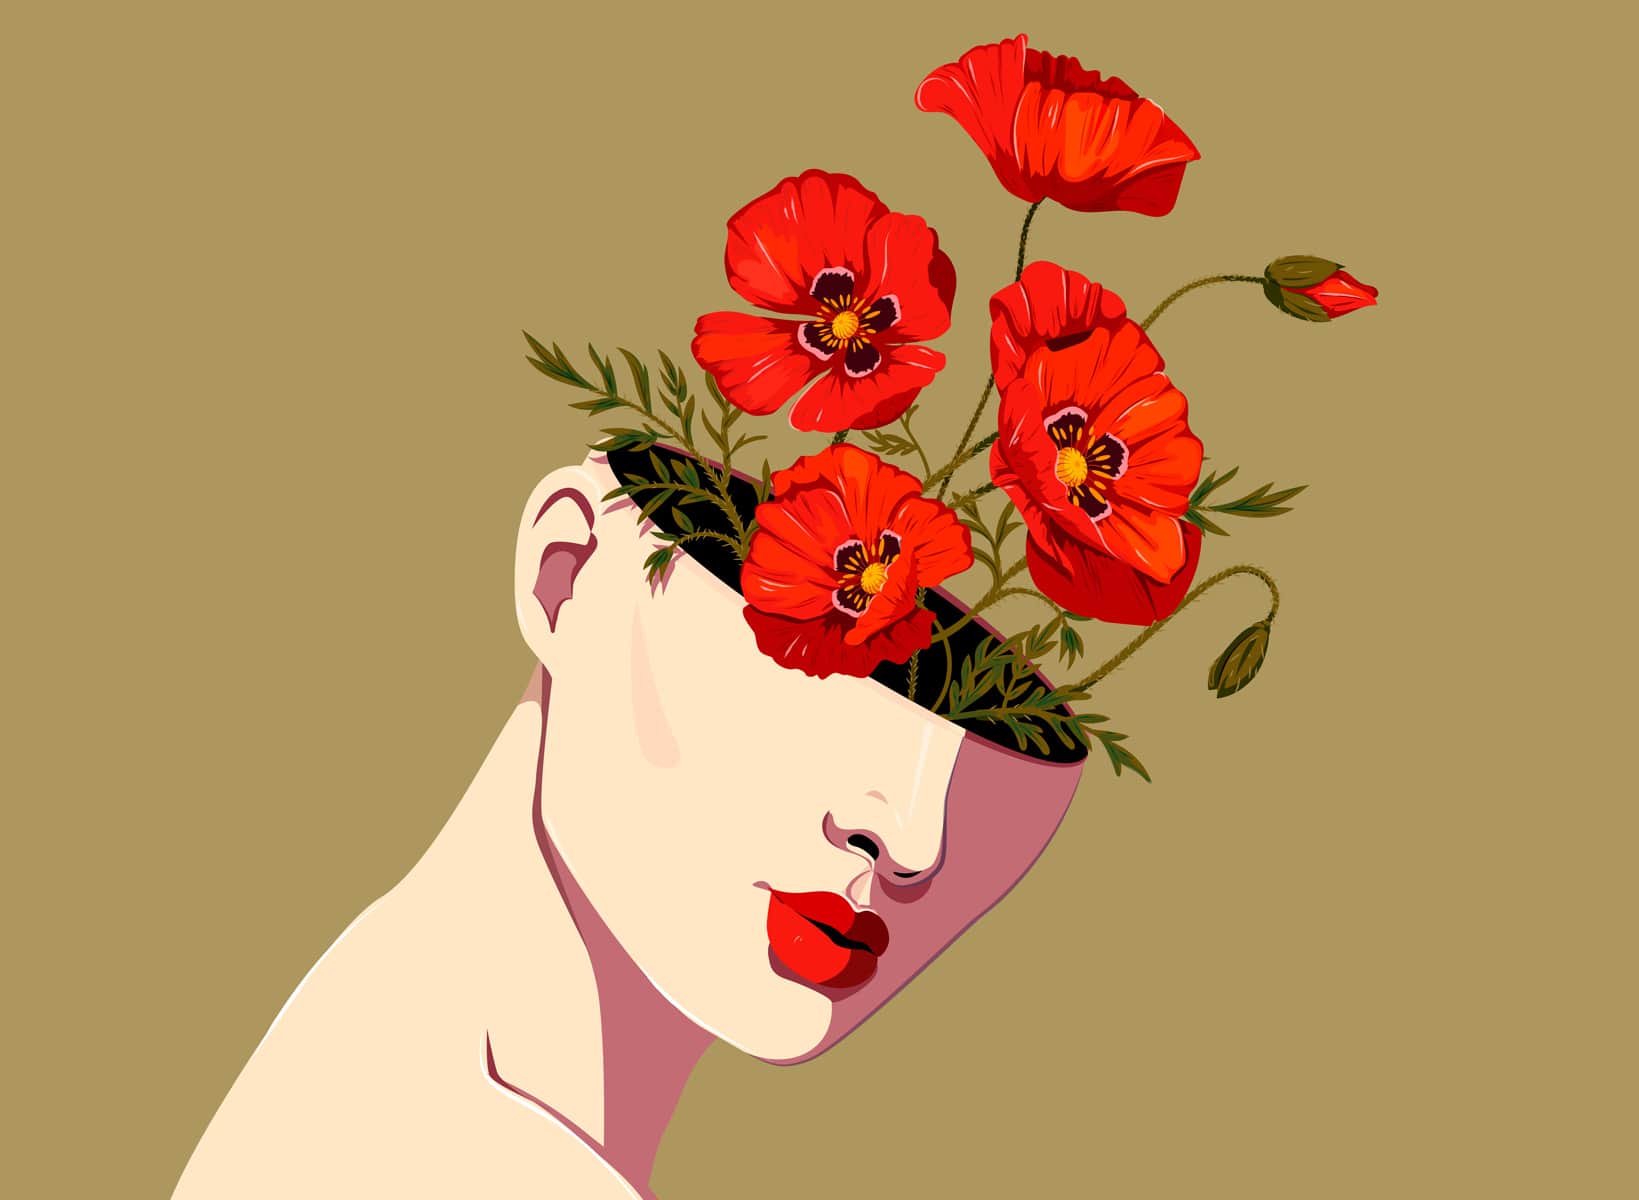 Flower head illustration of woman with poppy flowers growing out of her head